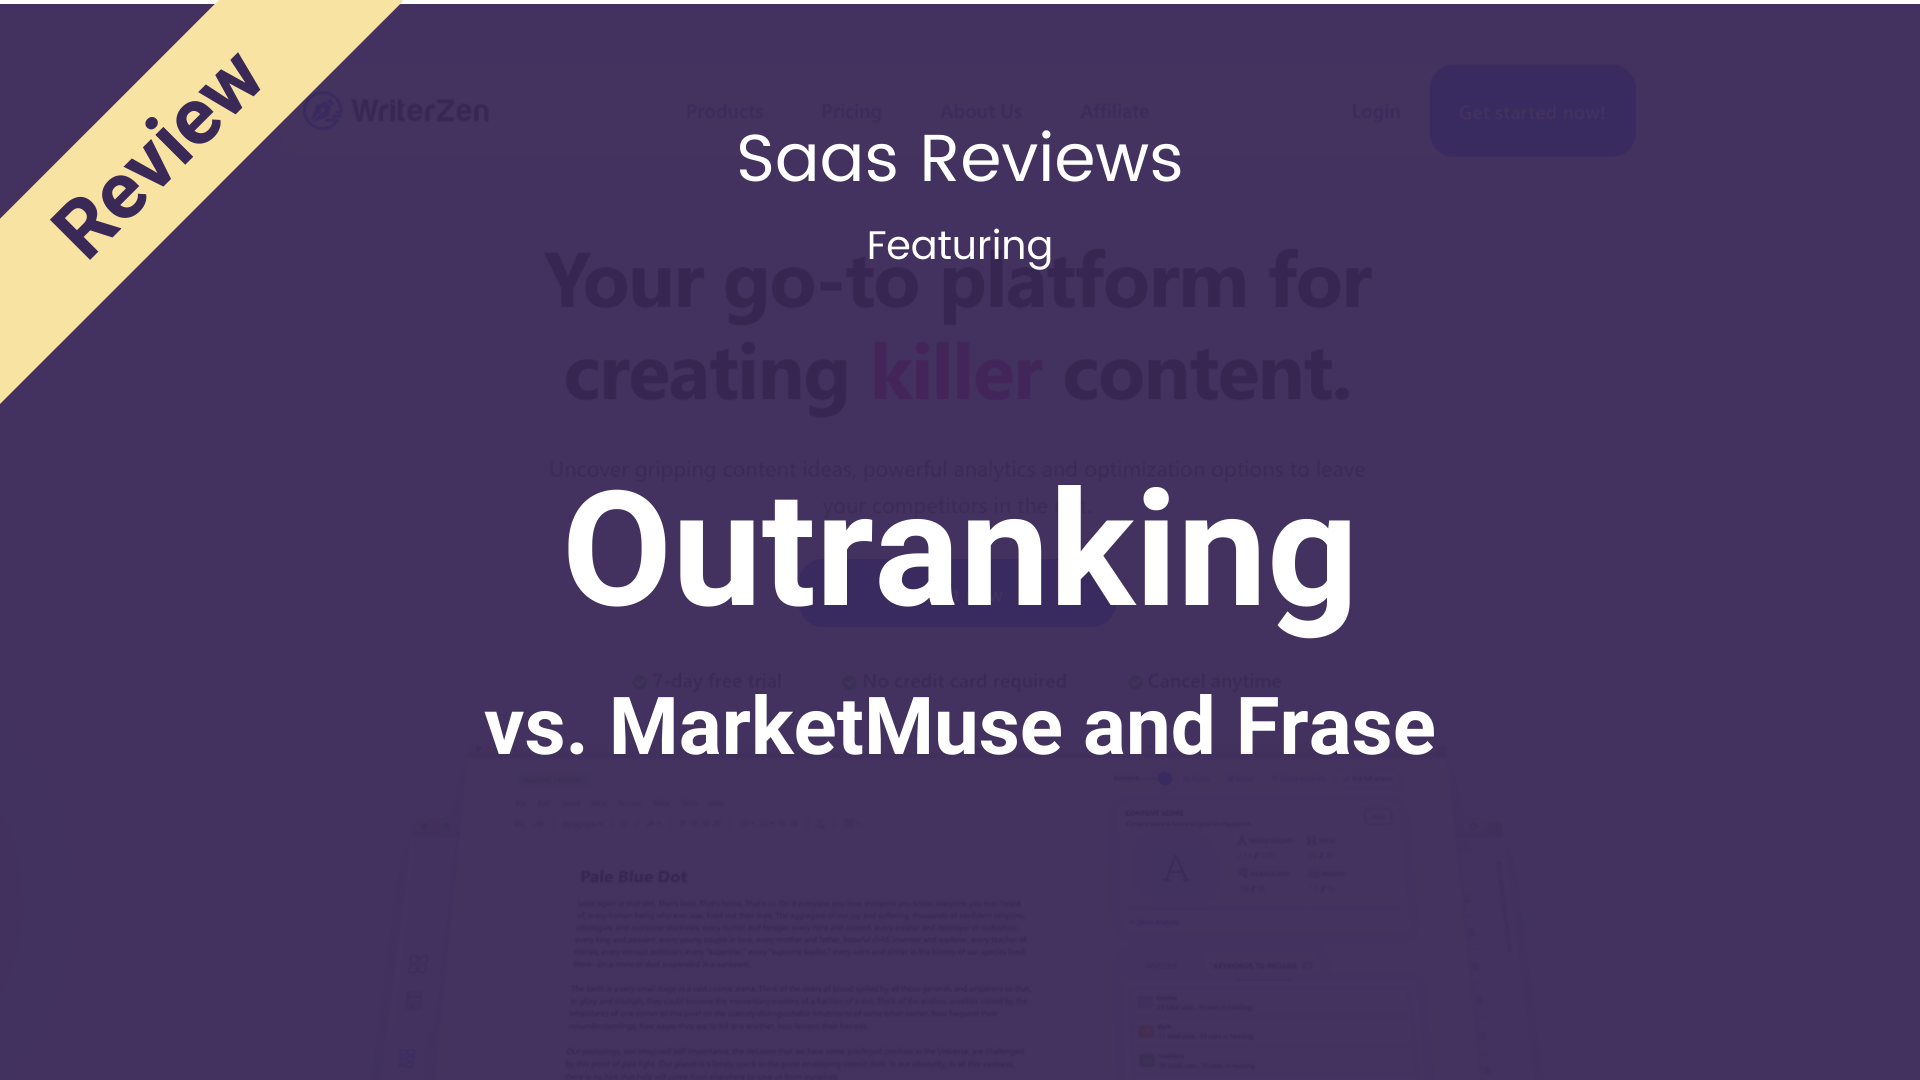 Outranking Review: Is It Better Than MarketMuse and Frase?